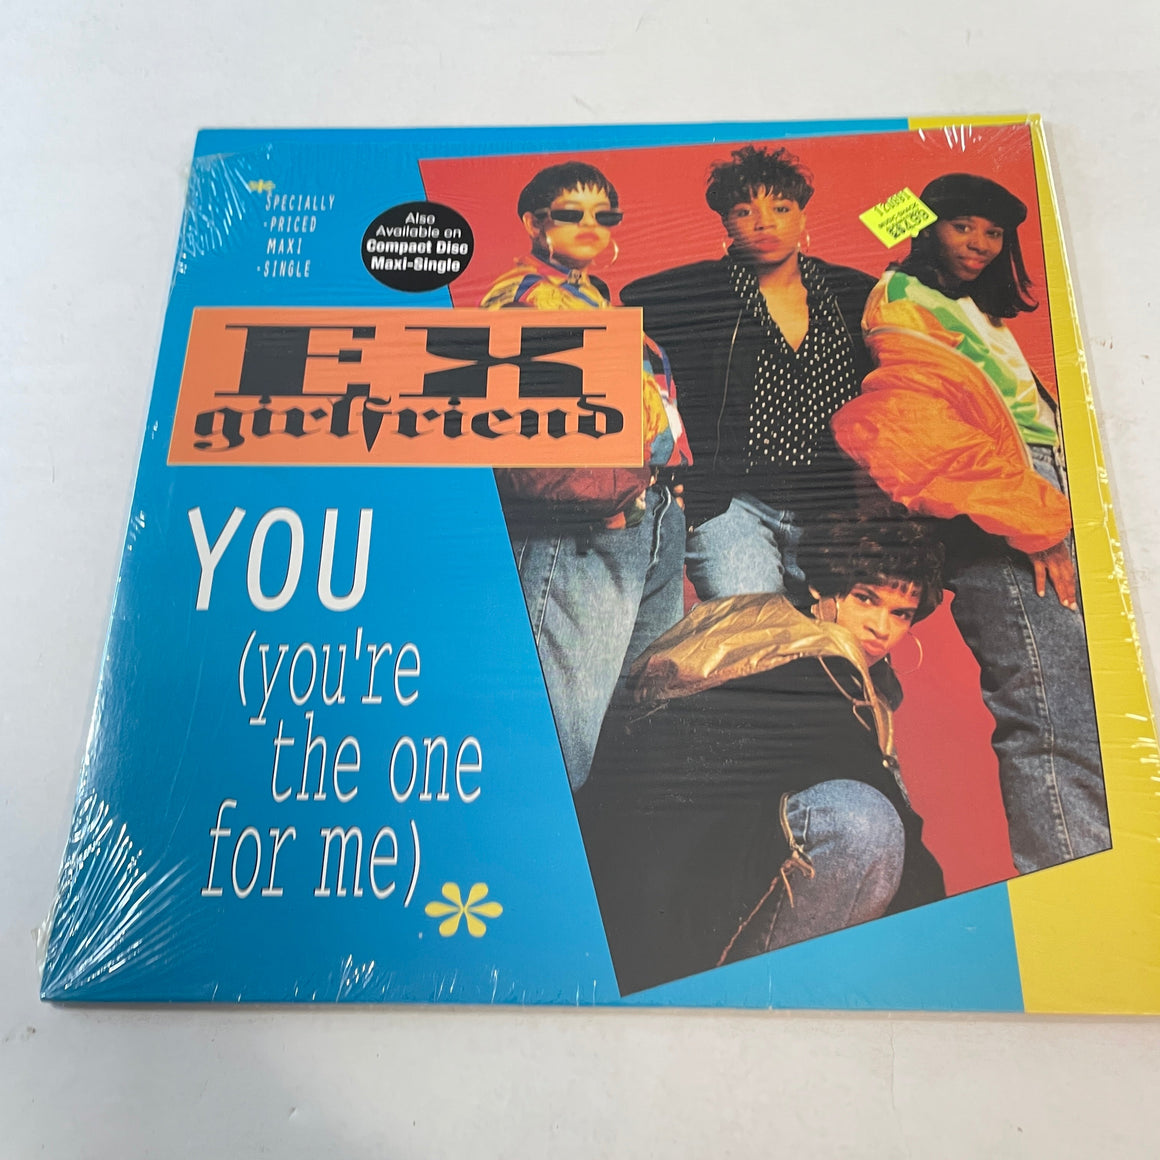 Ex-Girlfriend You (You're The One For Me) 12" Used Vinyl Single VG+\VG+